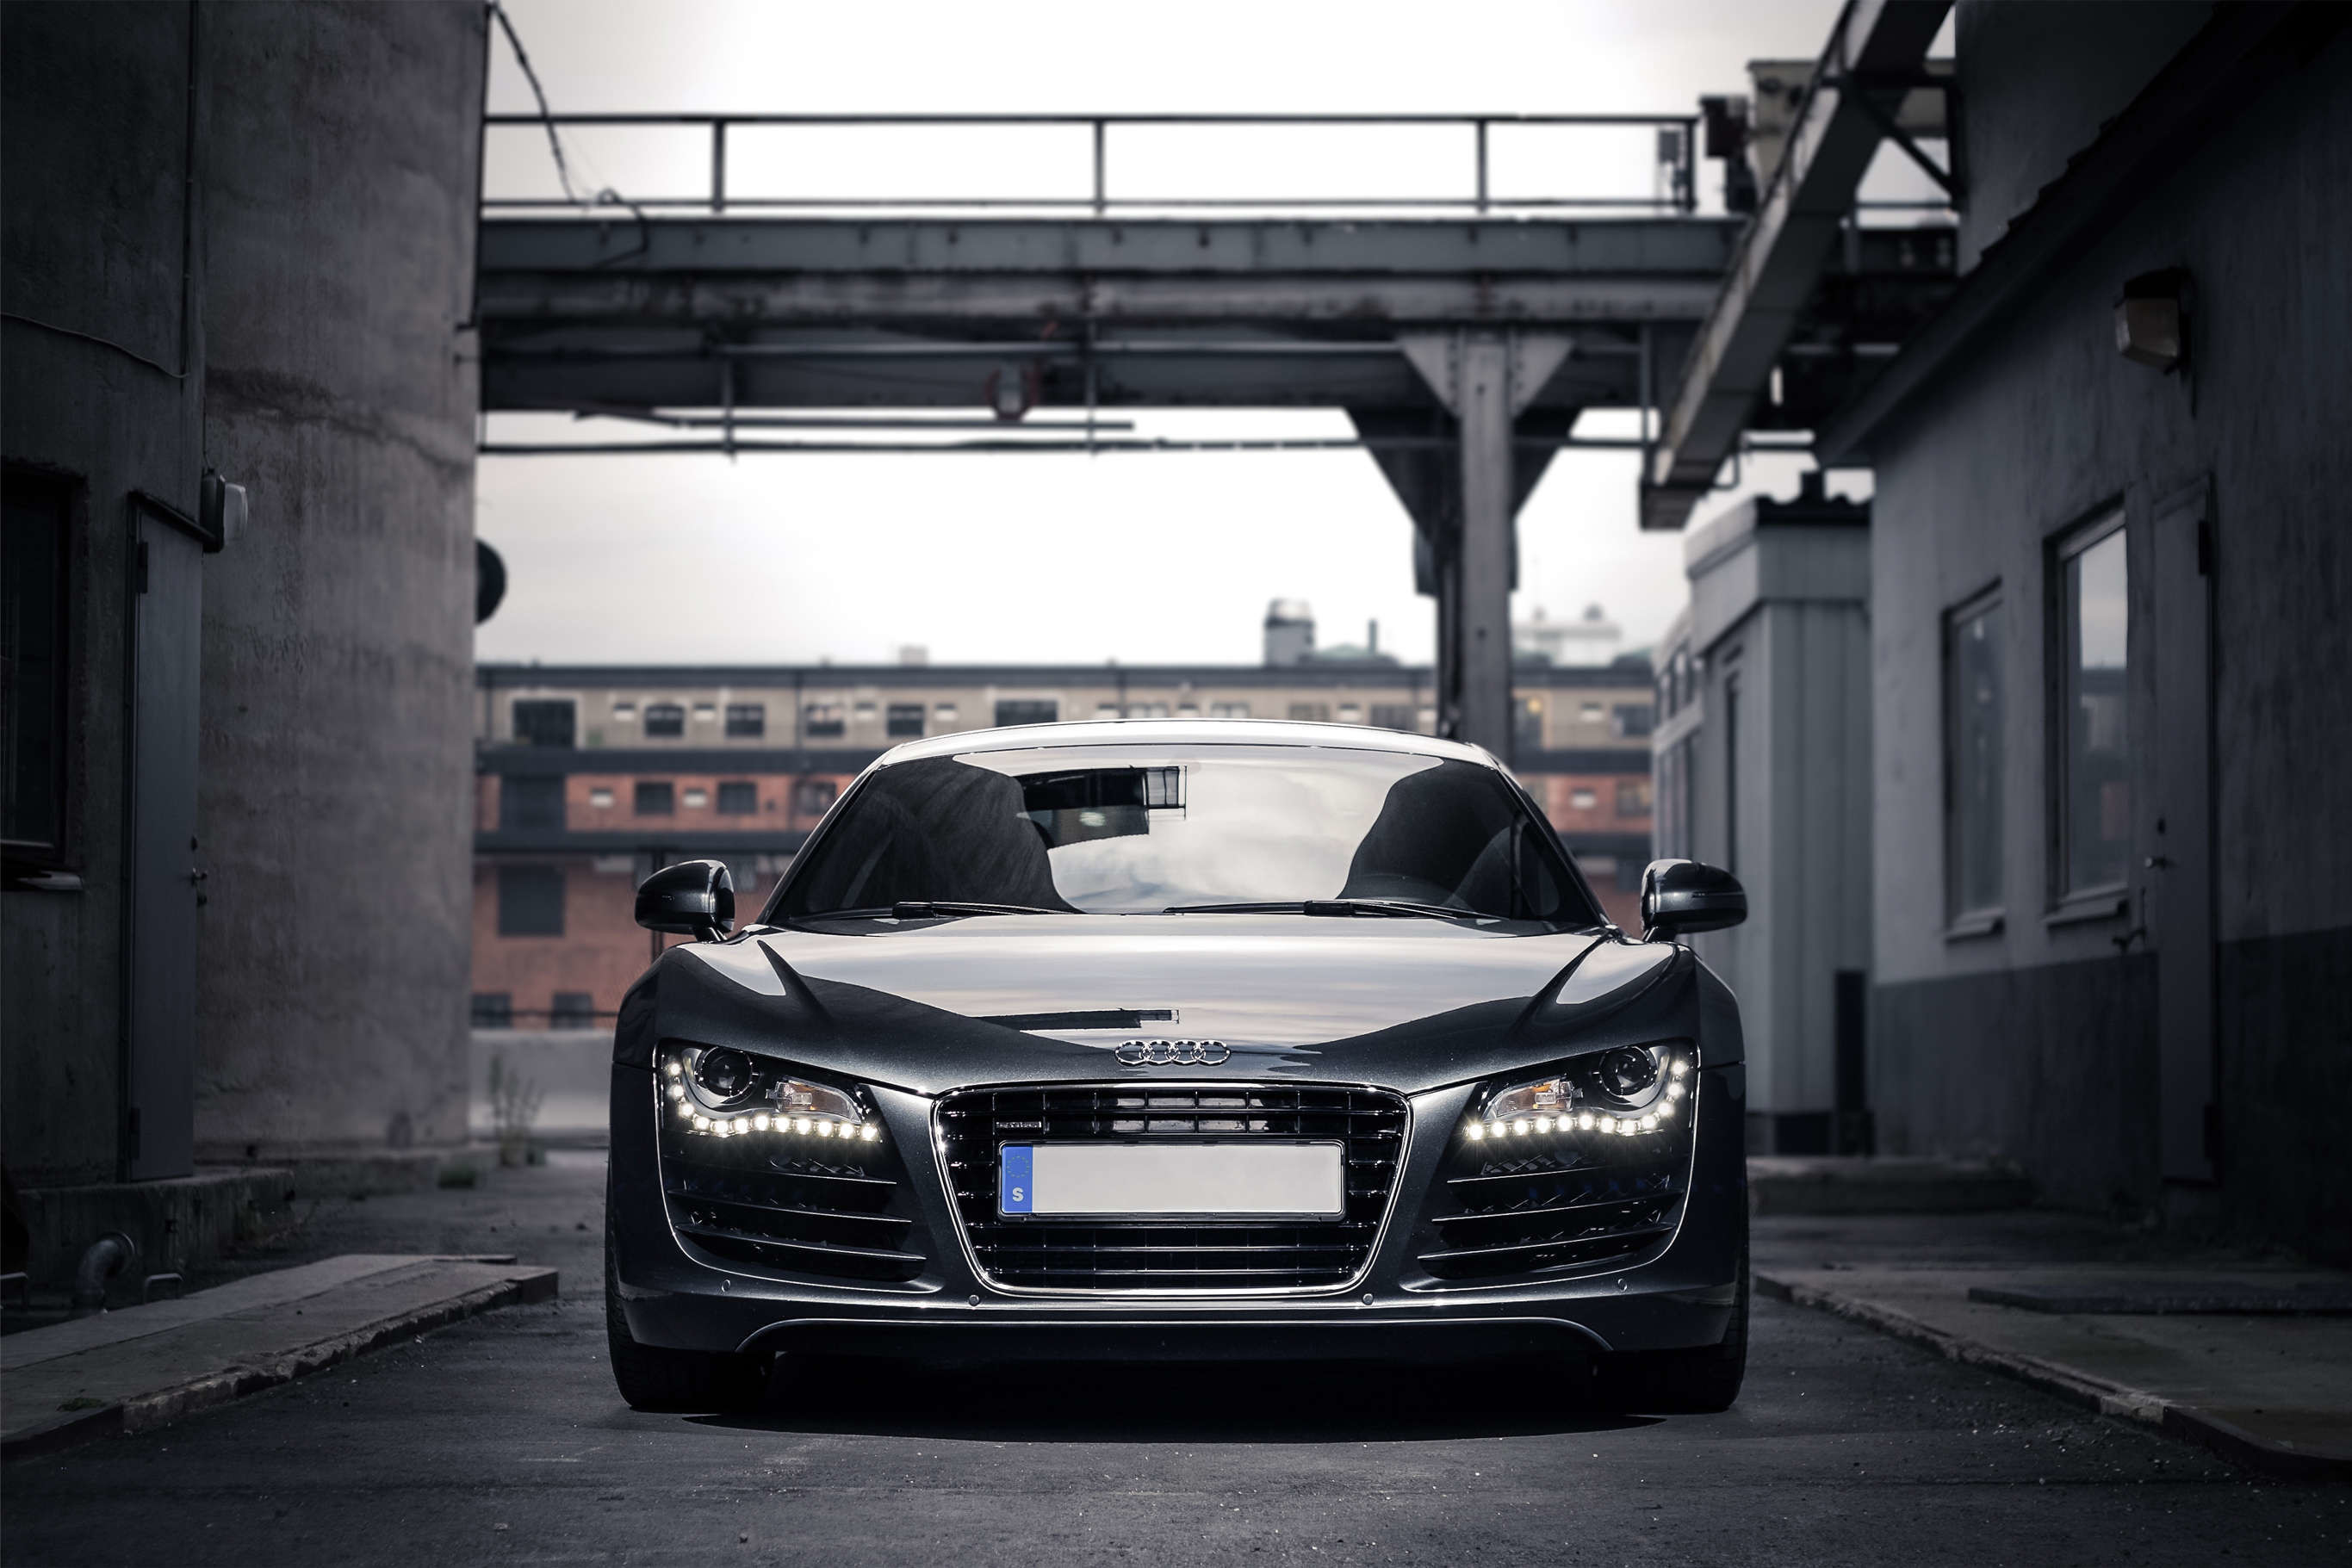 2731x1821 High Resolution White Audi R8 Wallpapers, Adriana Mcniff.  0.283 MB